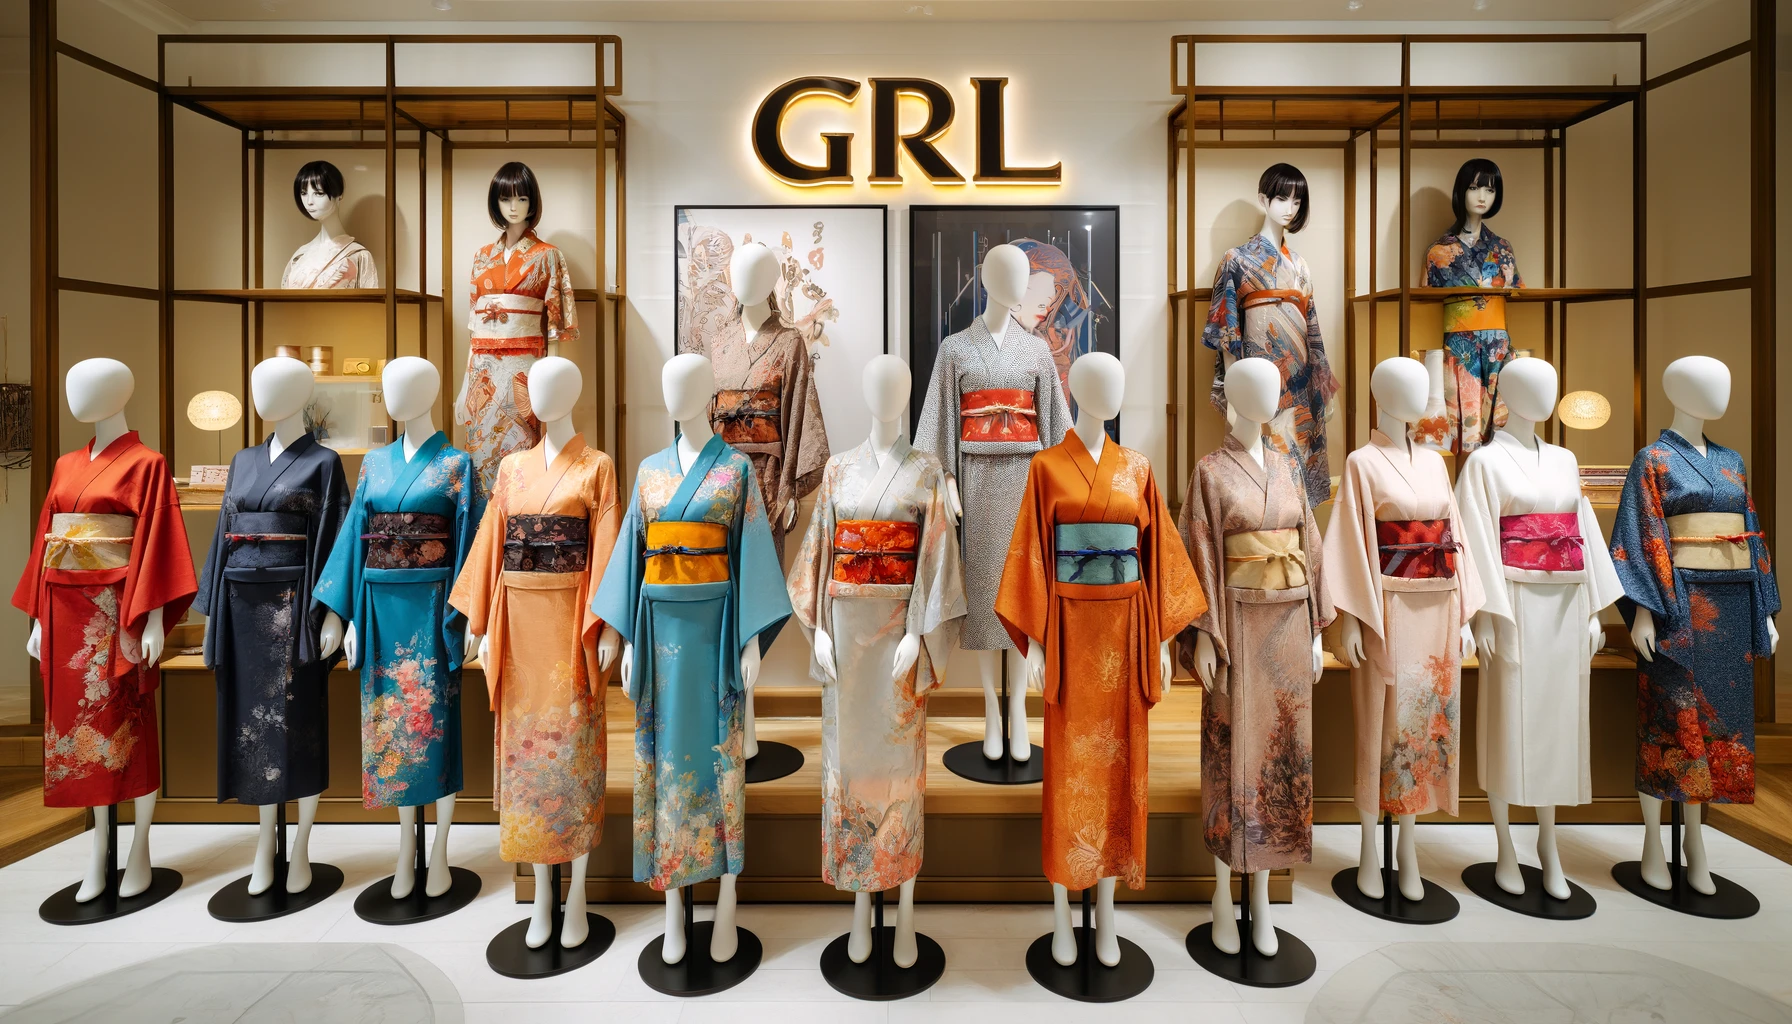 A stylish display of popular yukatas from GRL. The image features a variety of colorful and fashionable yukatas on mannequins and models, showcasing the intricate designs and patterns. The background includes a chic boutique setting with a sign that says 'GRL'.